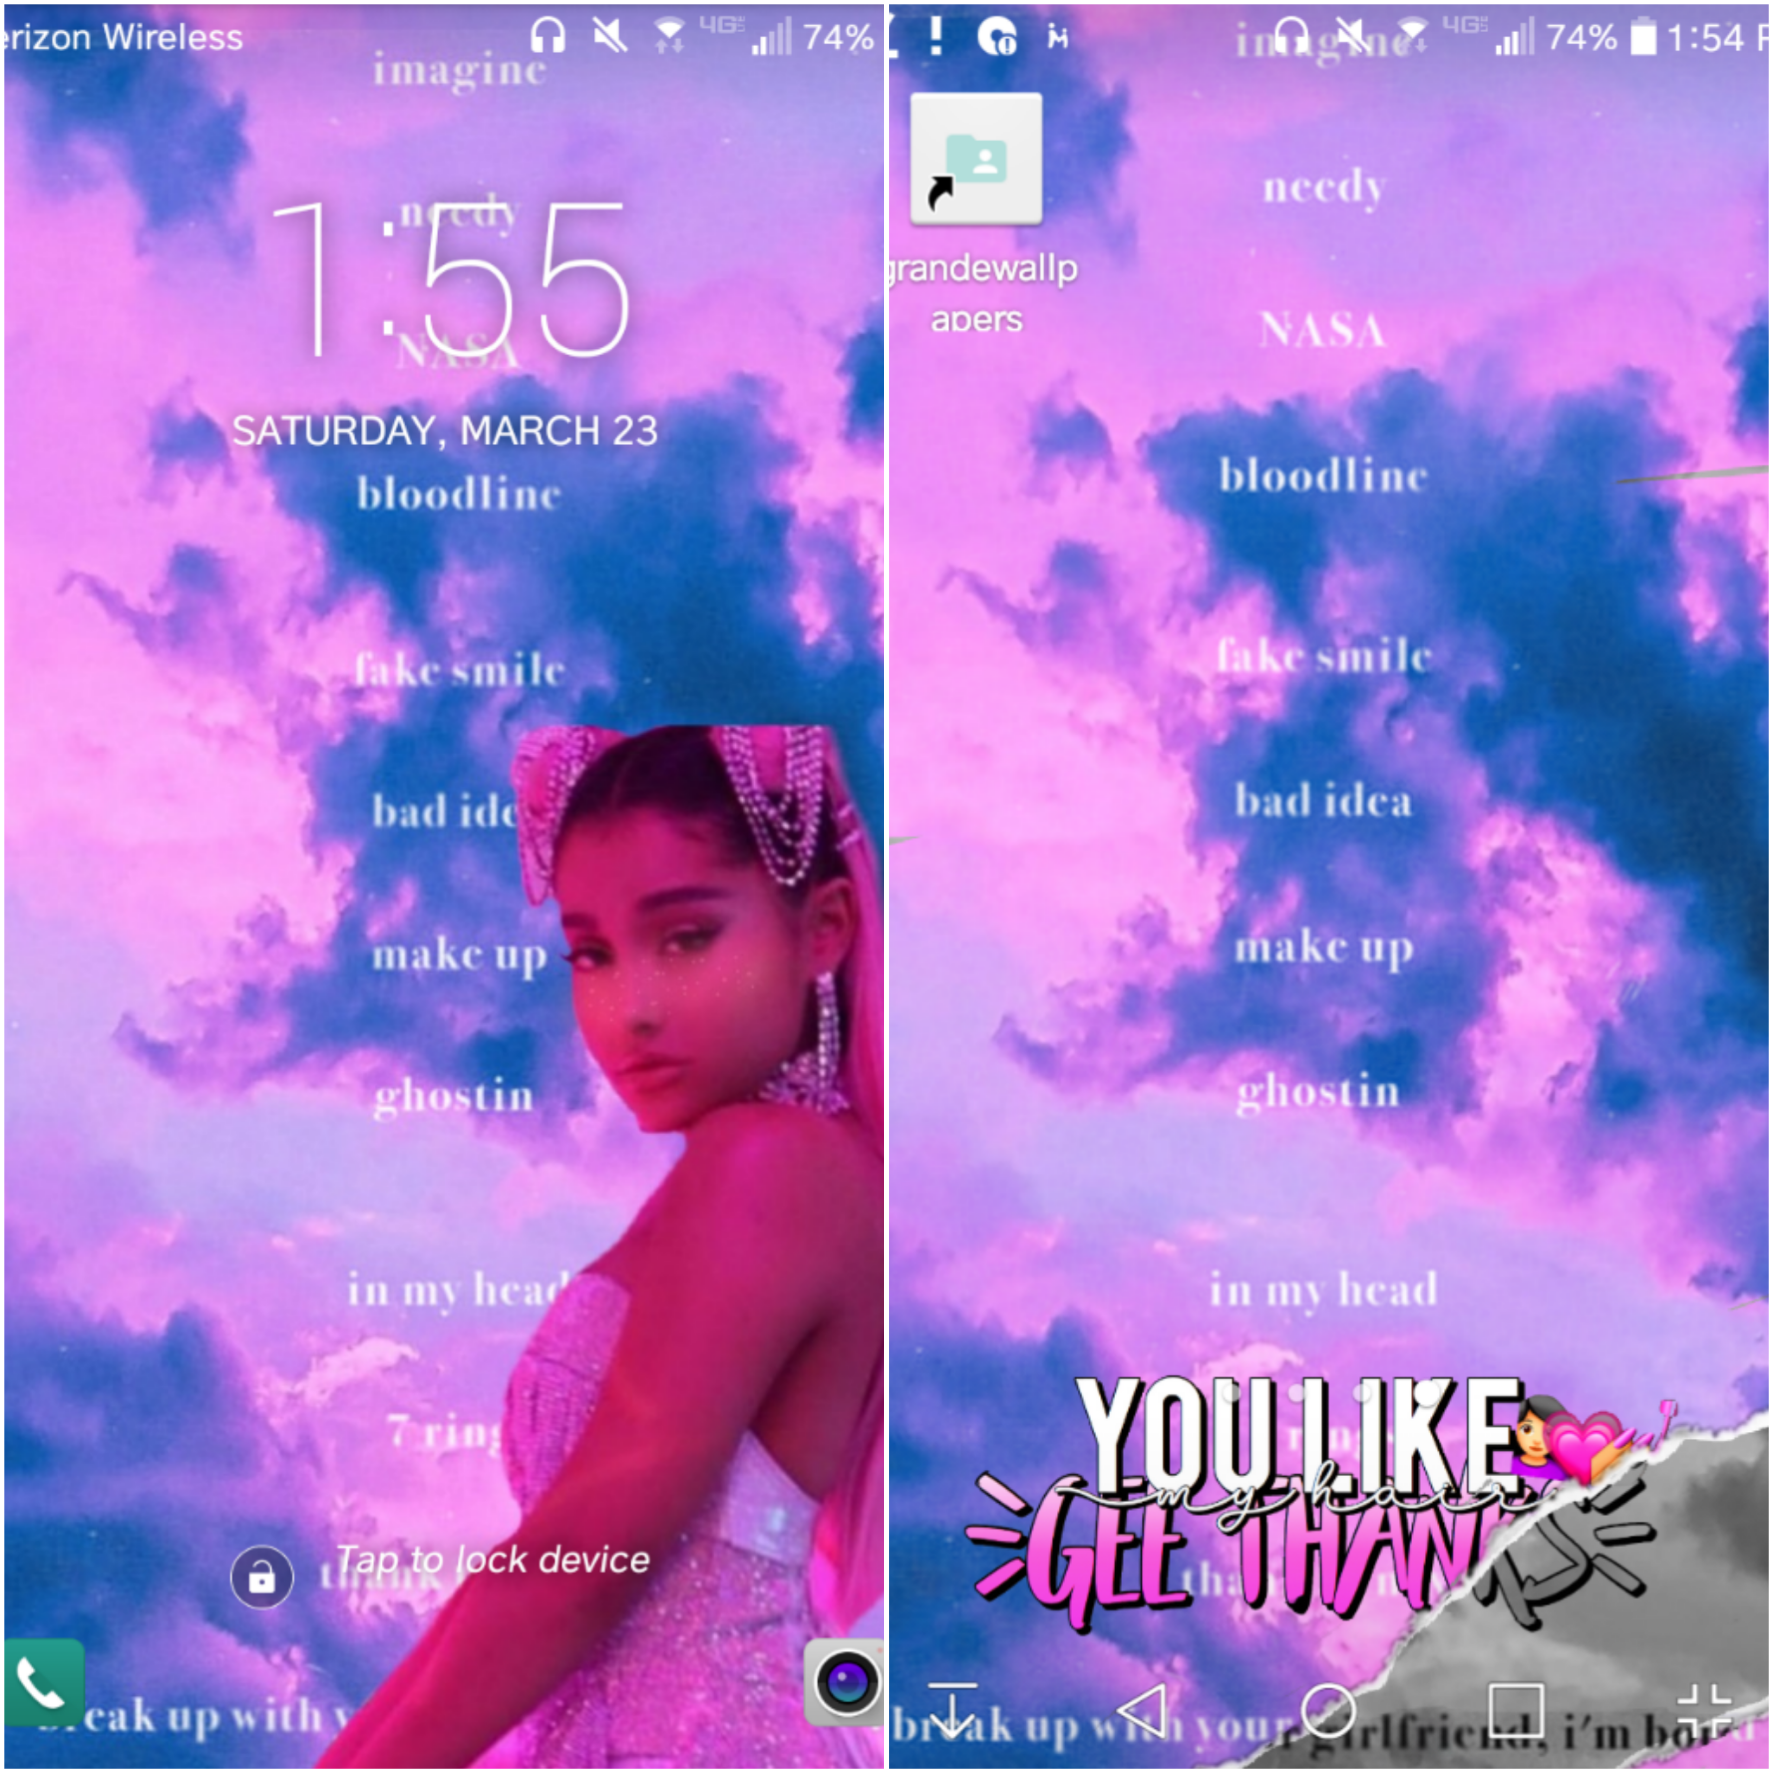 Ariana Grande 7 Rings Not Available For Use Request W